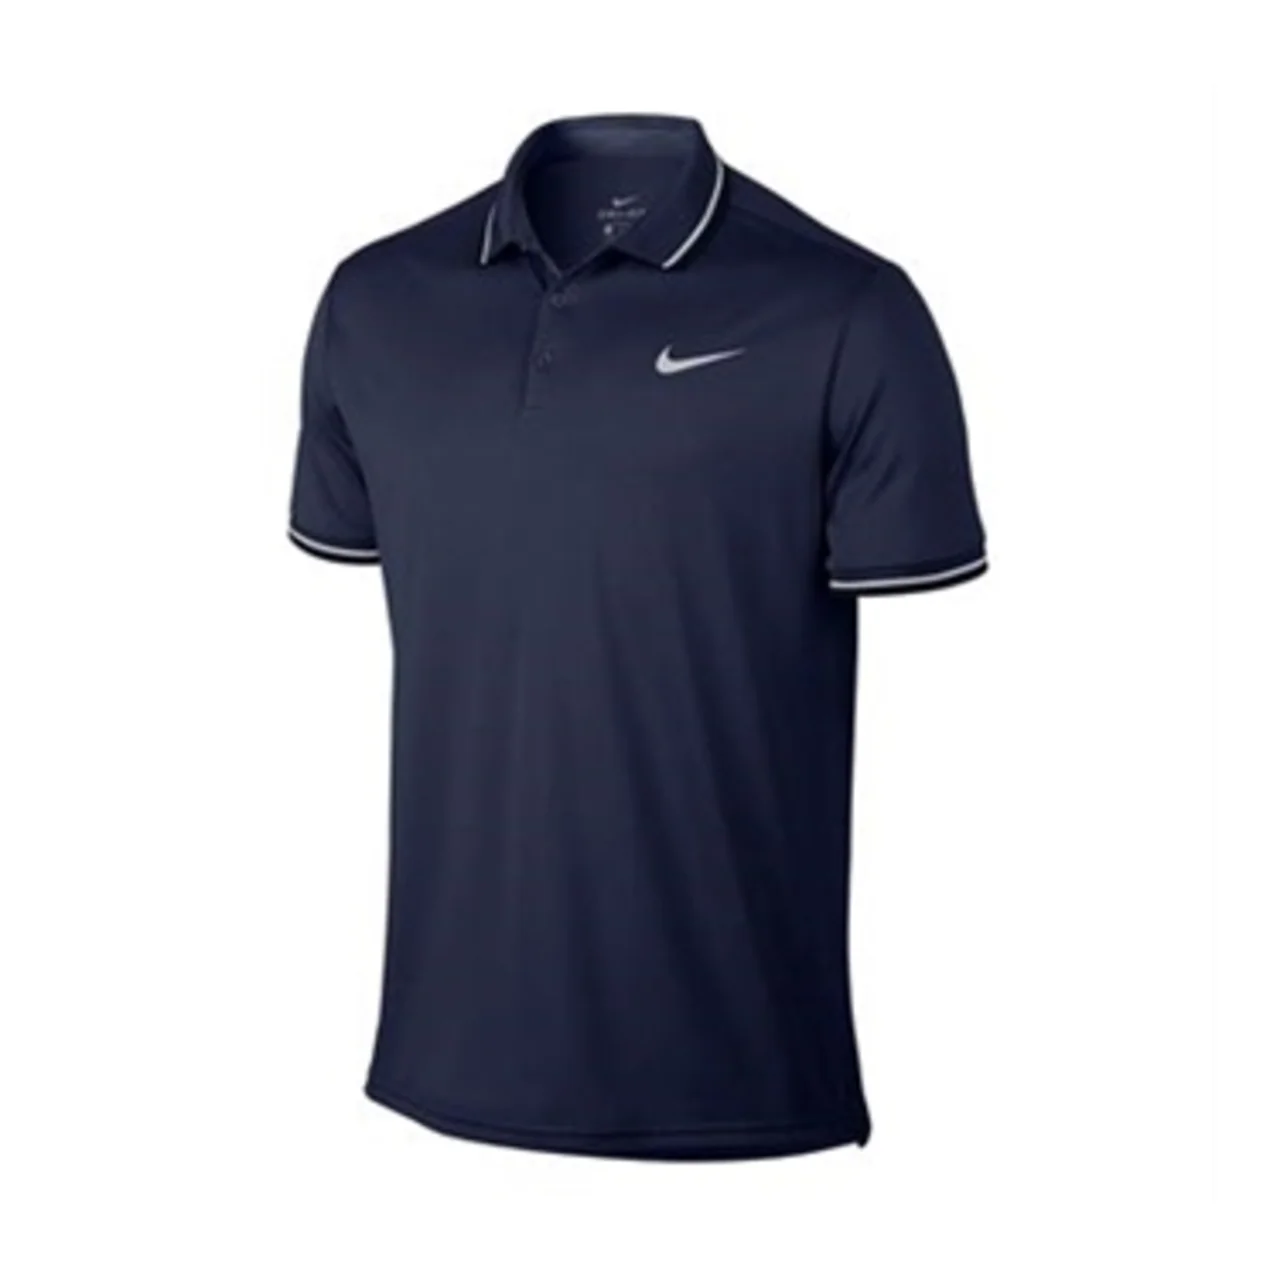 Nike Dry Solid Polo Navy Size S